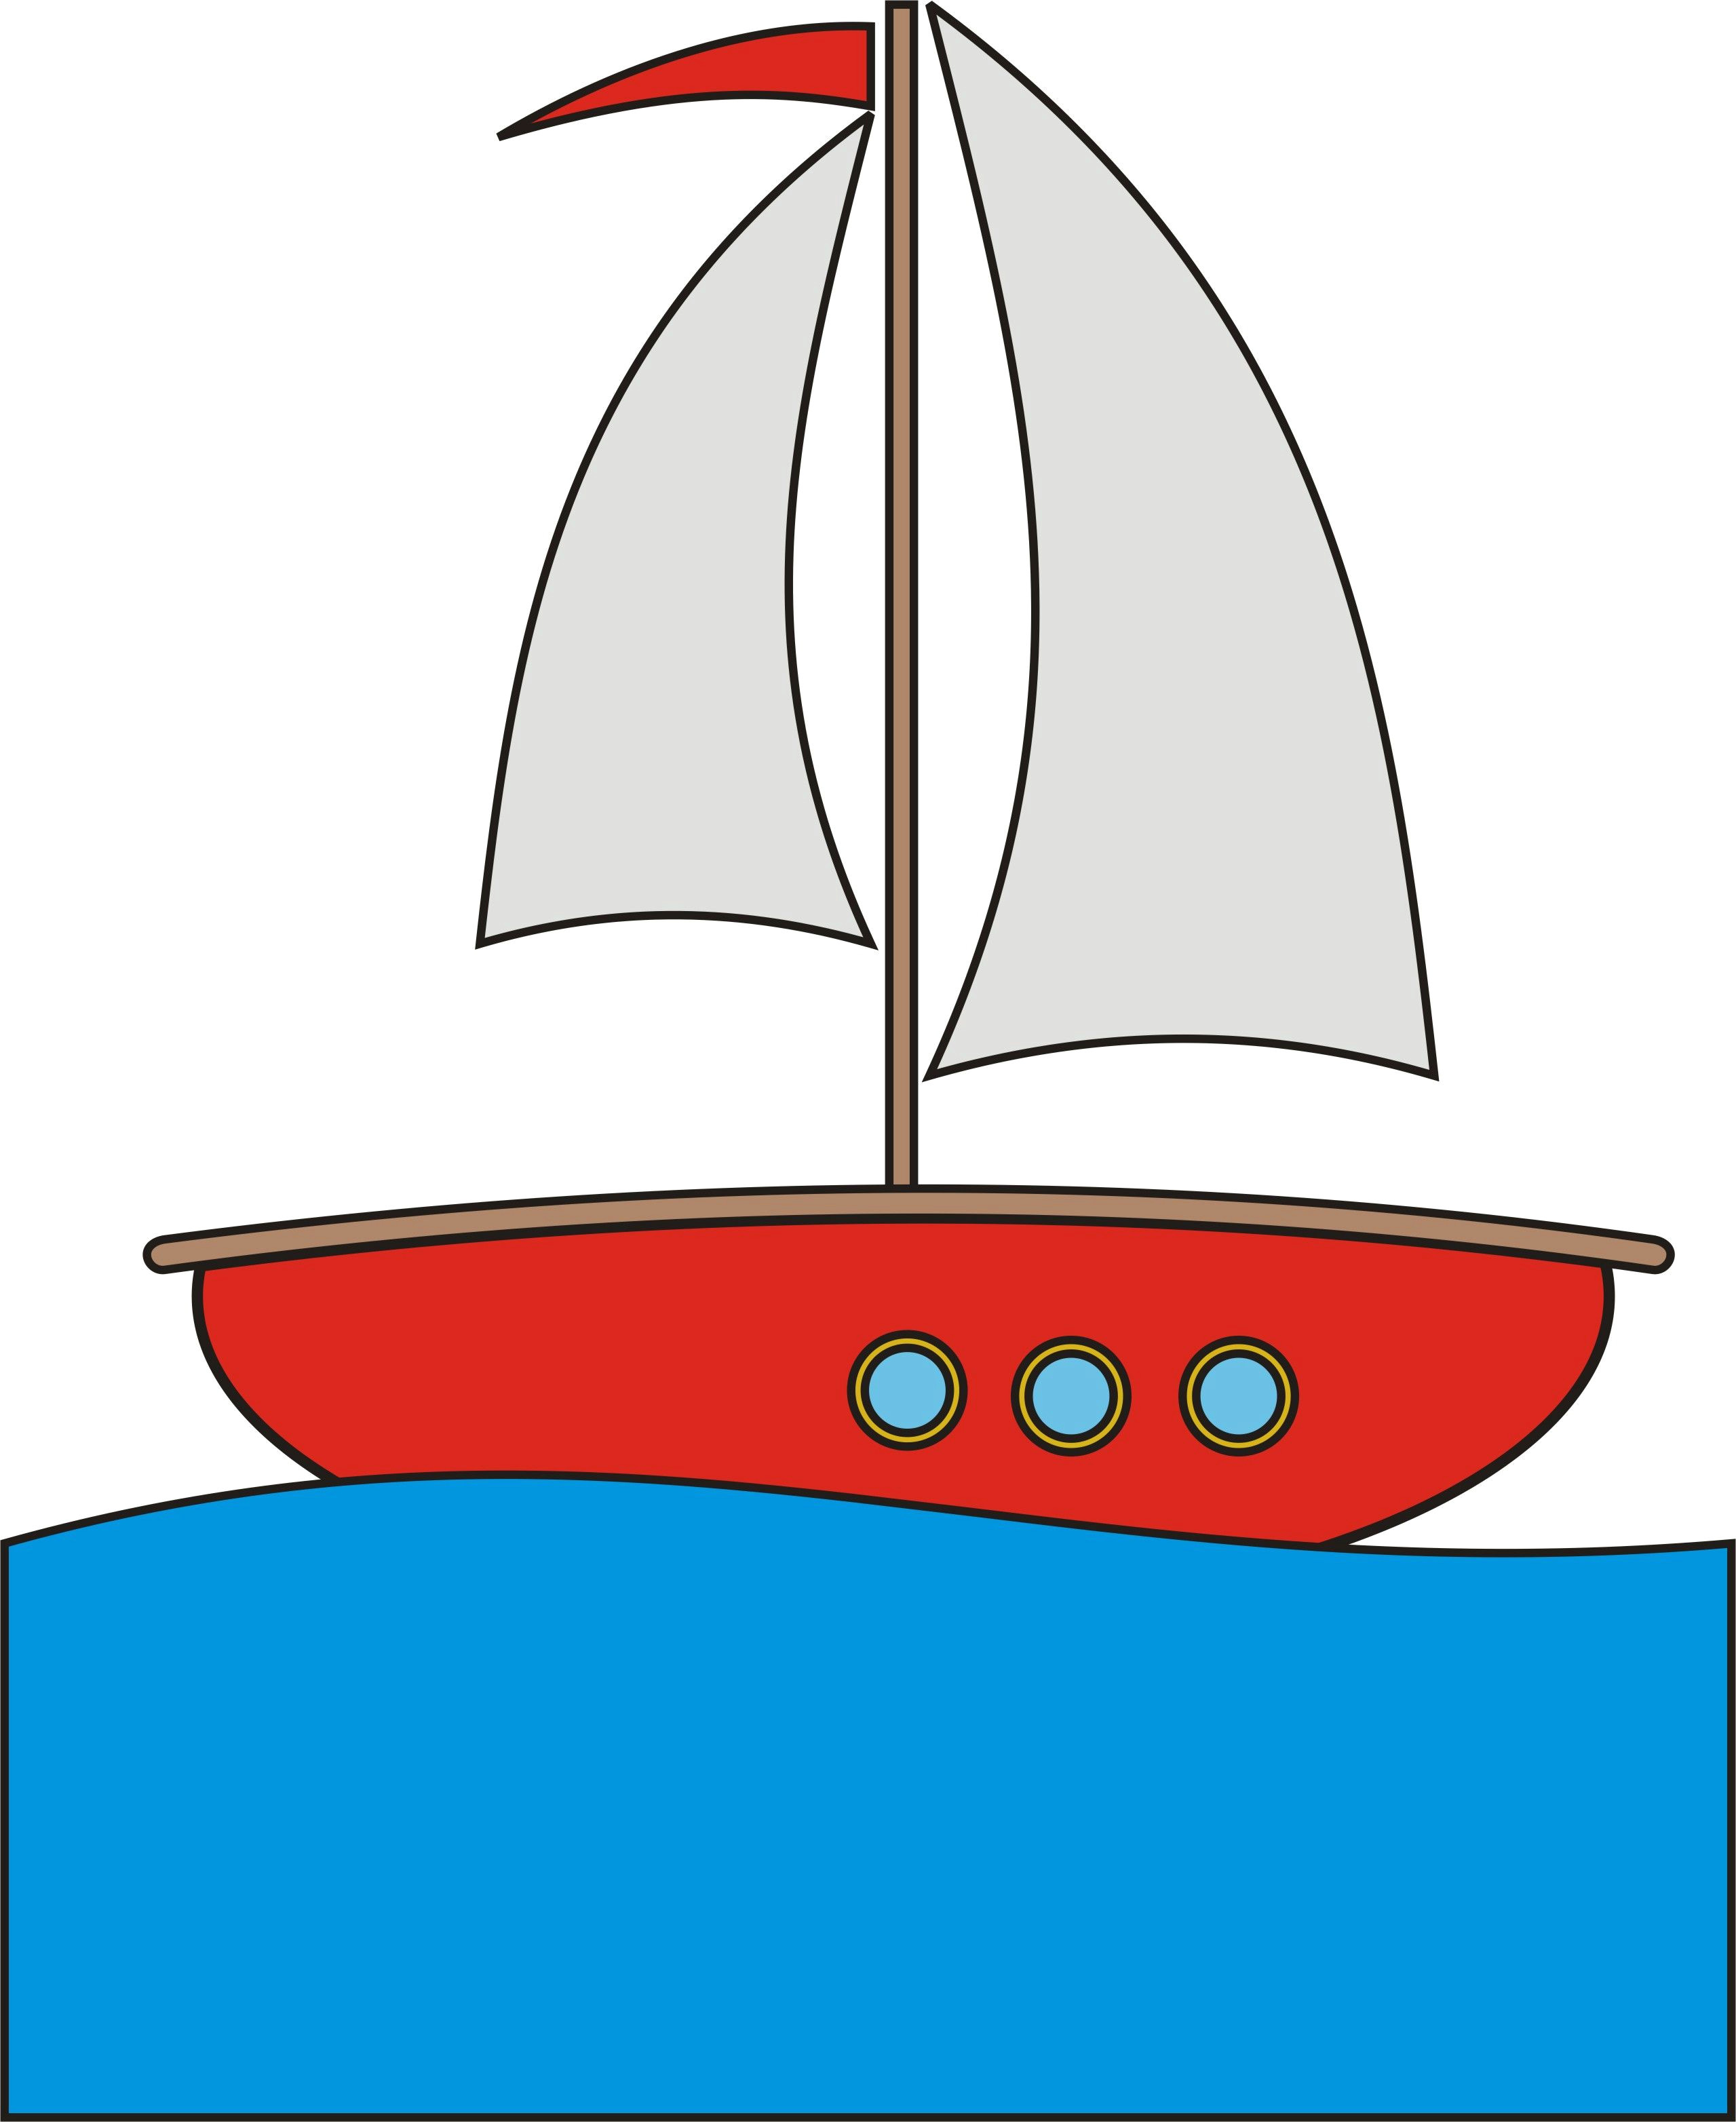 Cartoon Drawing Of A Yacht Cartoon Pictures Cartoon Boats Boat Cartoon Cartoon Boat